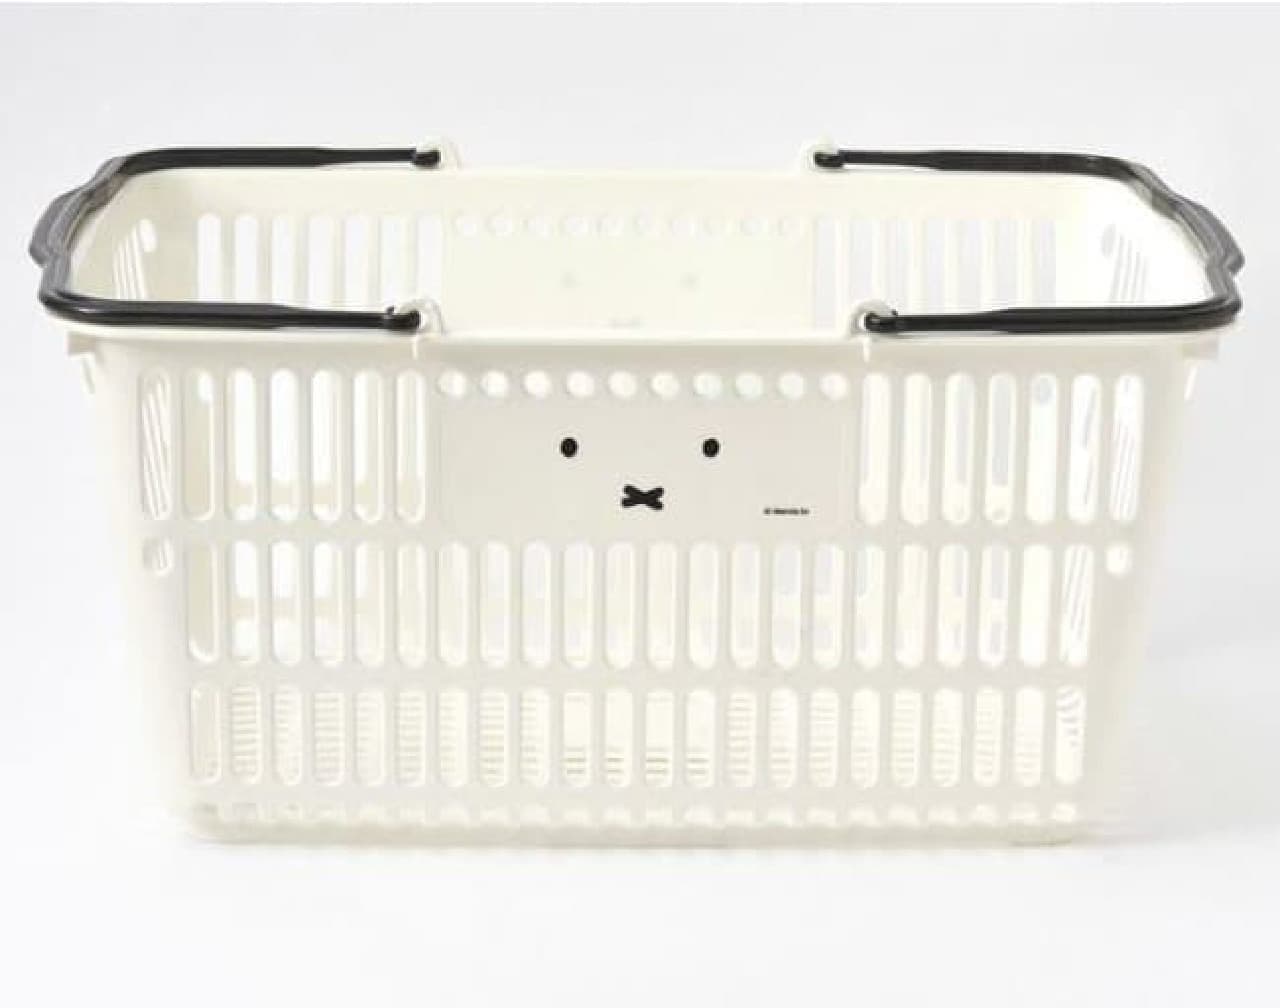 Miffy pattern cash register basket storage basket in Villevan --Active for shopping, room storage, and the outdoors!